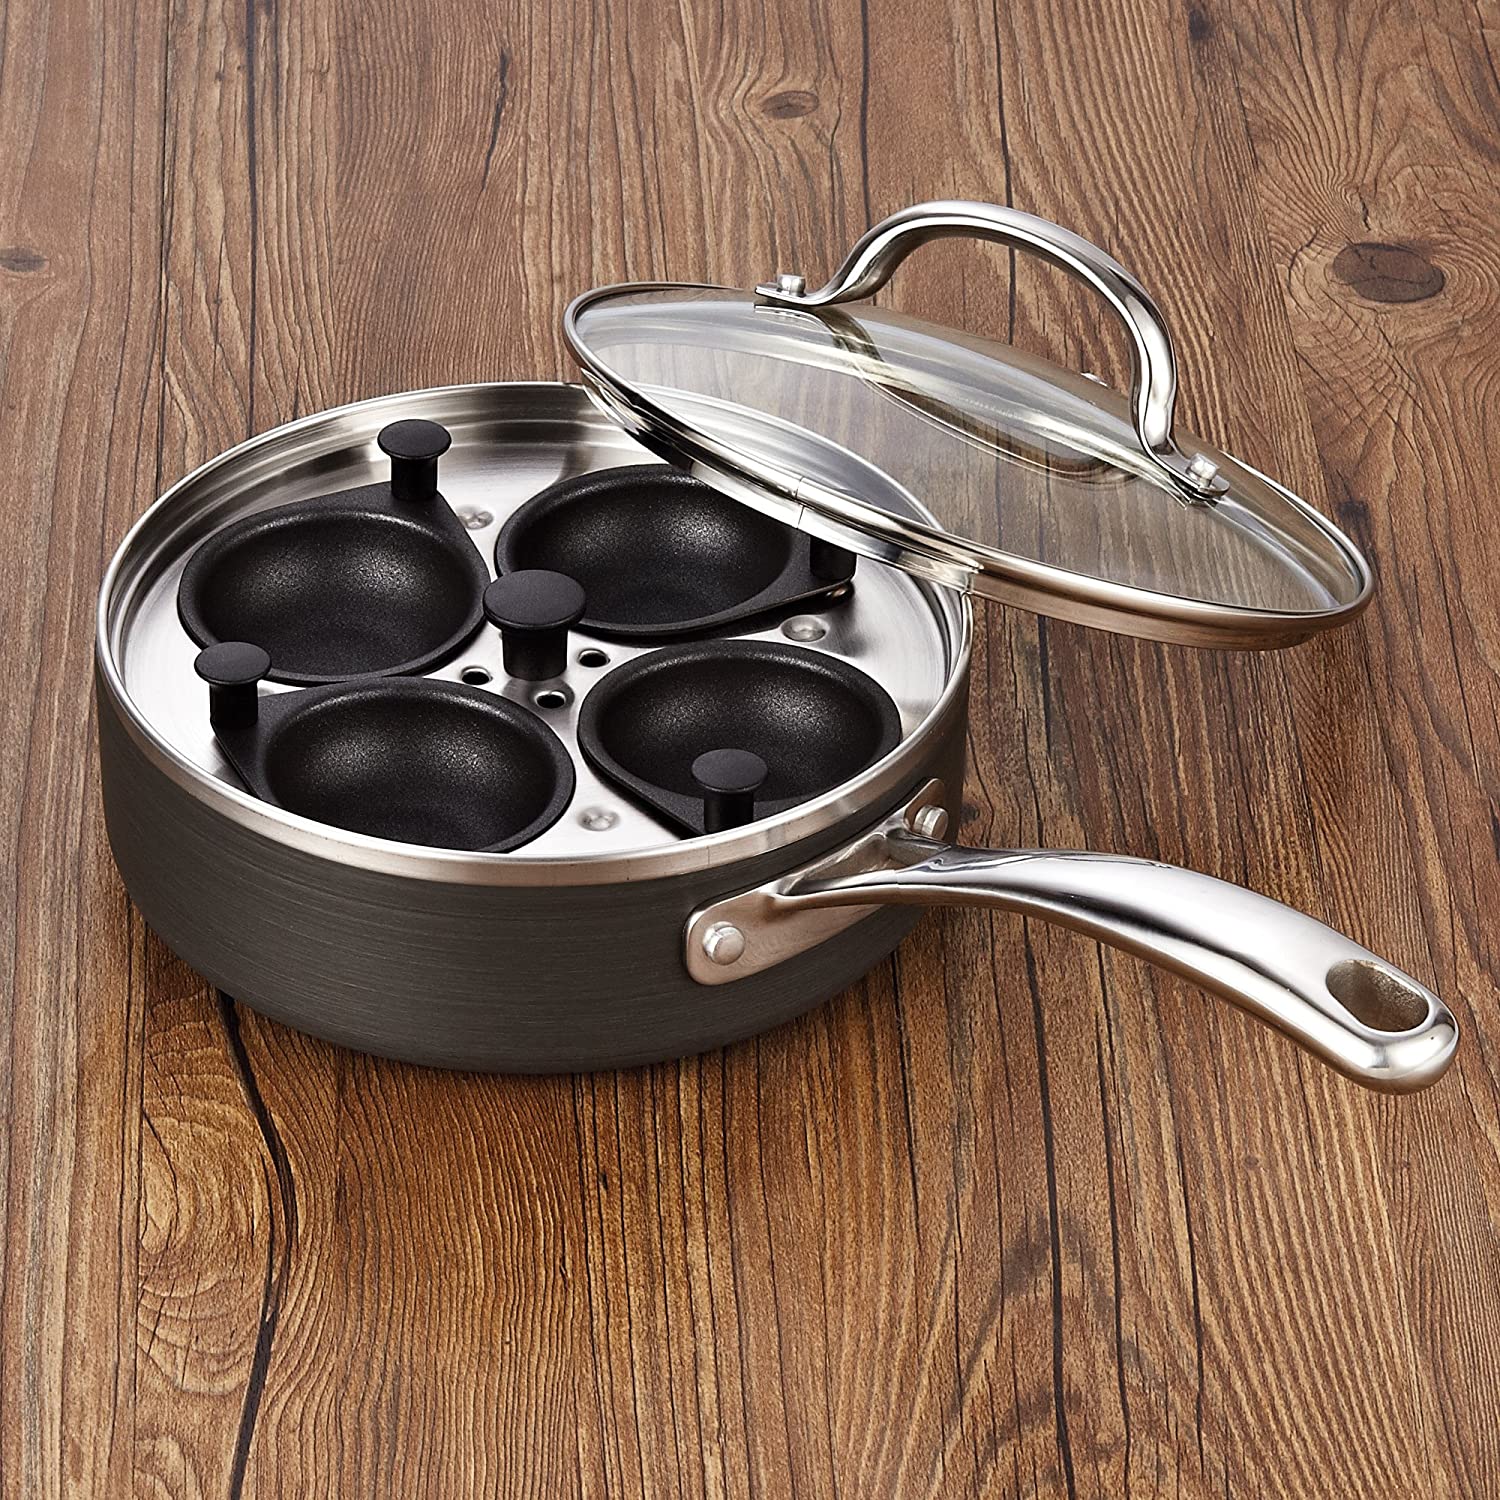 Cook Pro 4 Cup Non Stick Stainless Steel Egg Poacher & Reviews